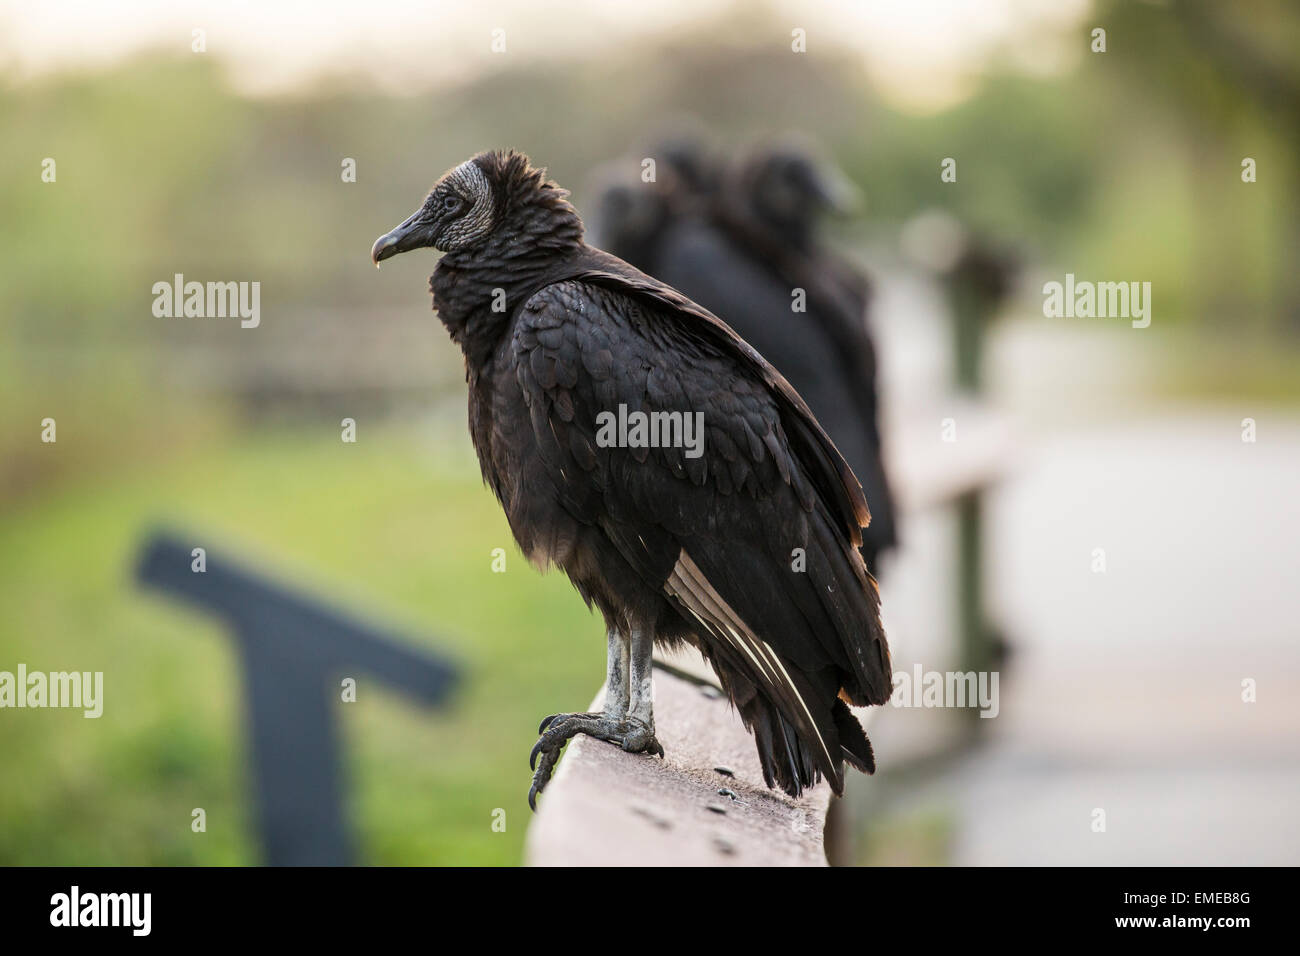 Black vultures (Coragyps atratus) also known as the American black vulture along the Anhinga Trail in the Florida Everglades. Stock Photo